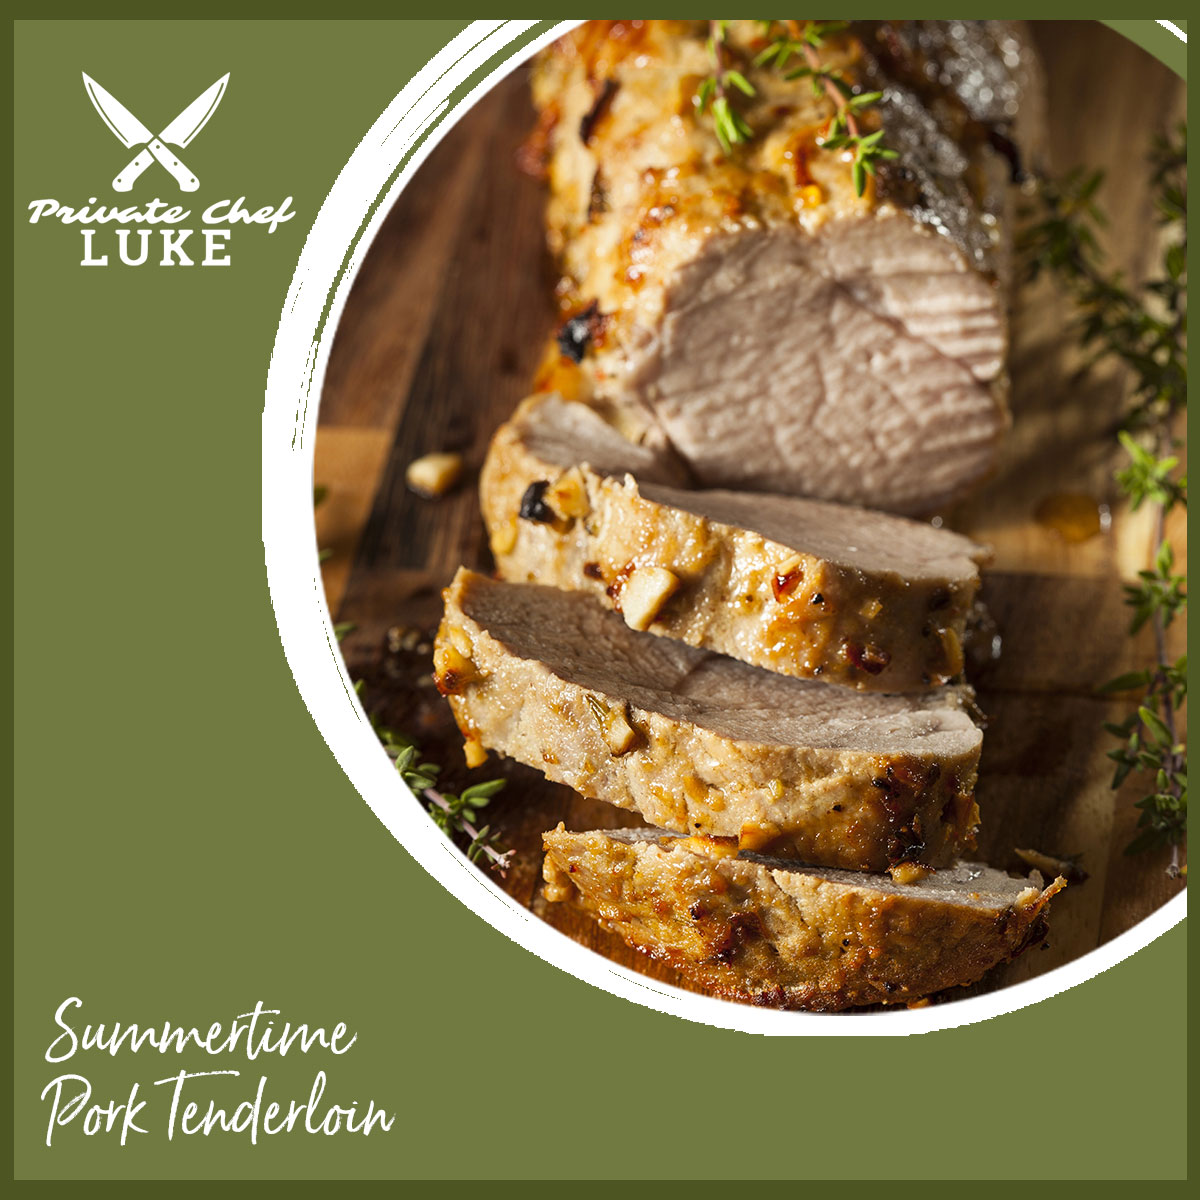 Click to view and download Chef Luke's recipe for Summertime Pork Tenderloins.